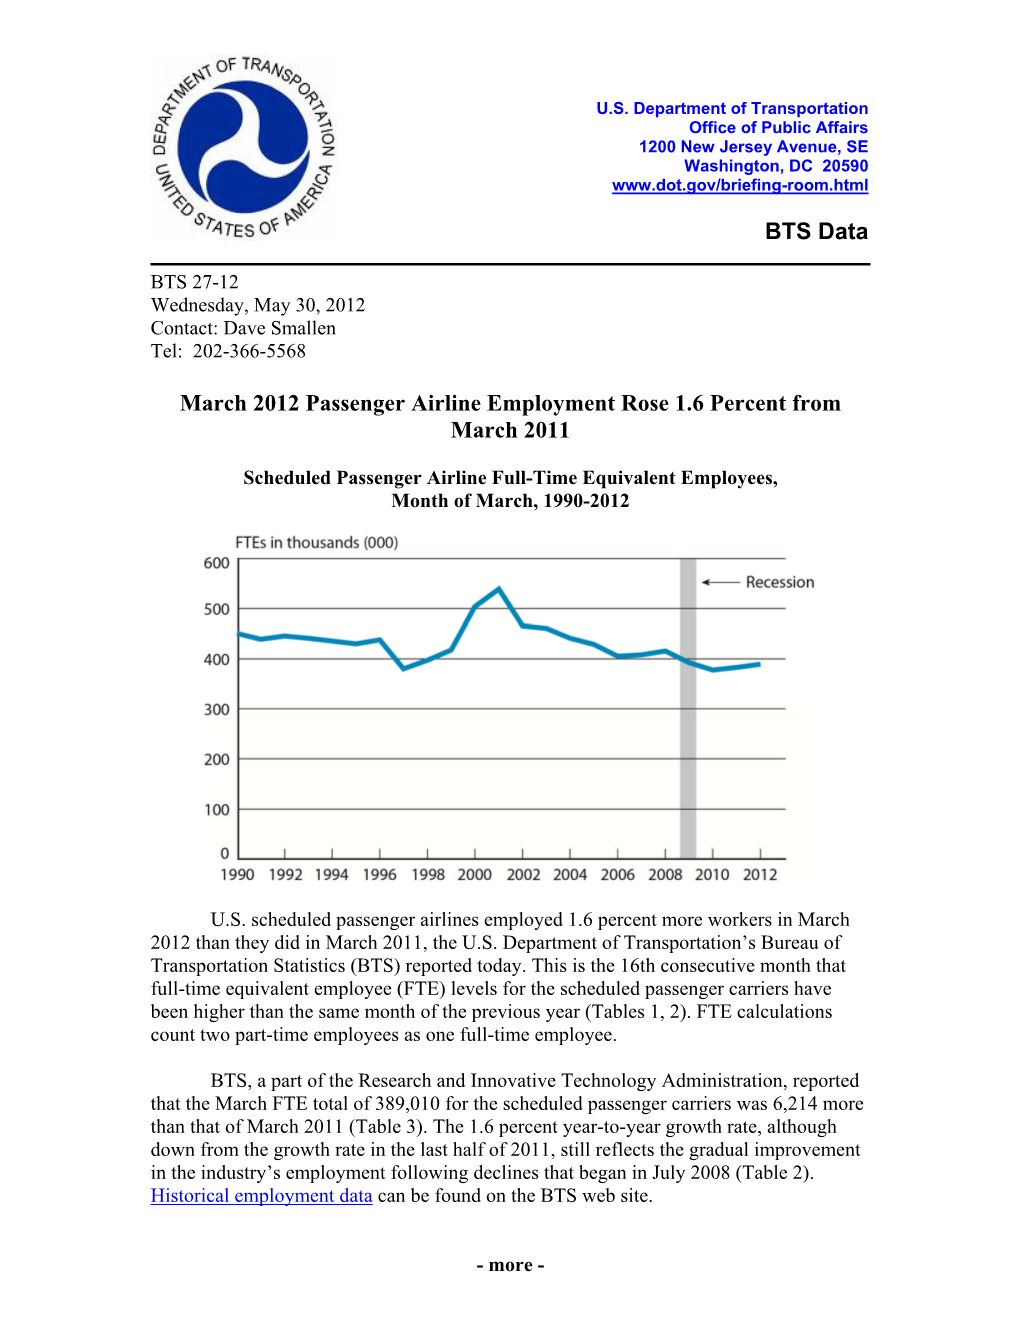 March 2012 Passenger Airline Employment Rose 1.6 Percent from March 2011